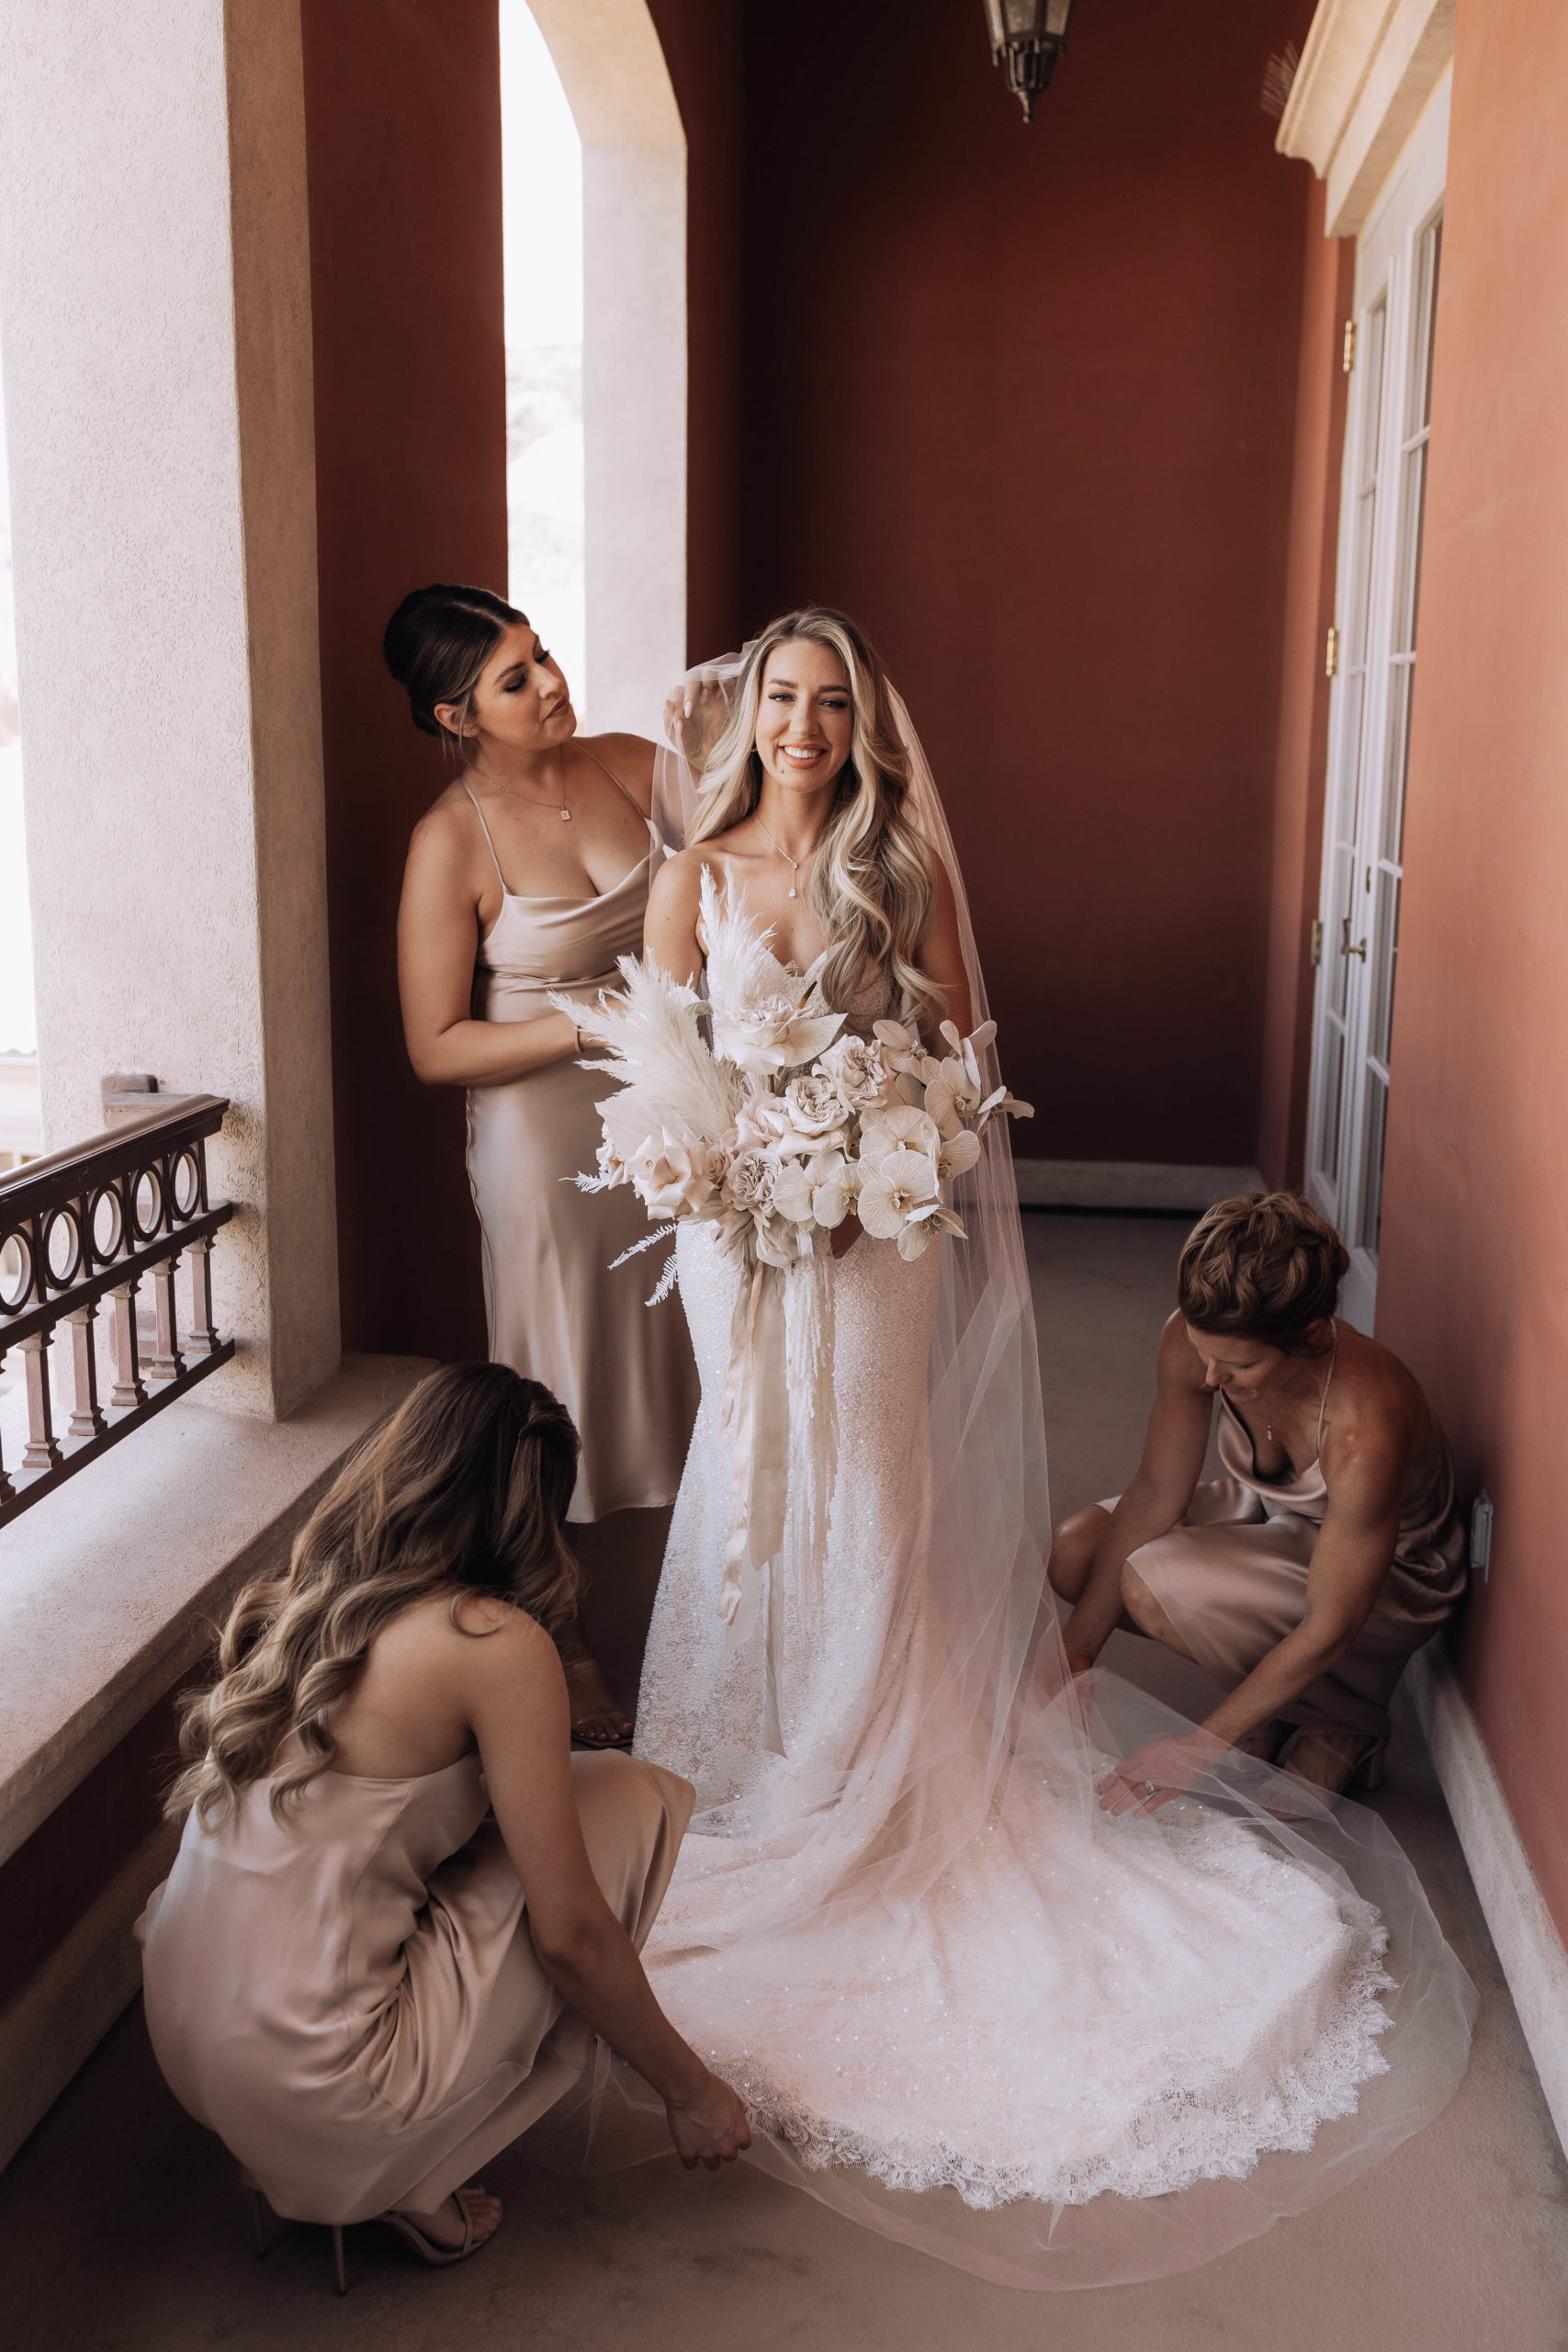 Lake Las Vegas Meets Modern Boho Bride. The bridesmaid helping the bride with her train and viel